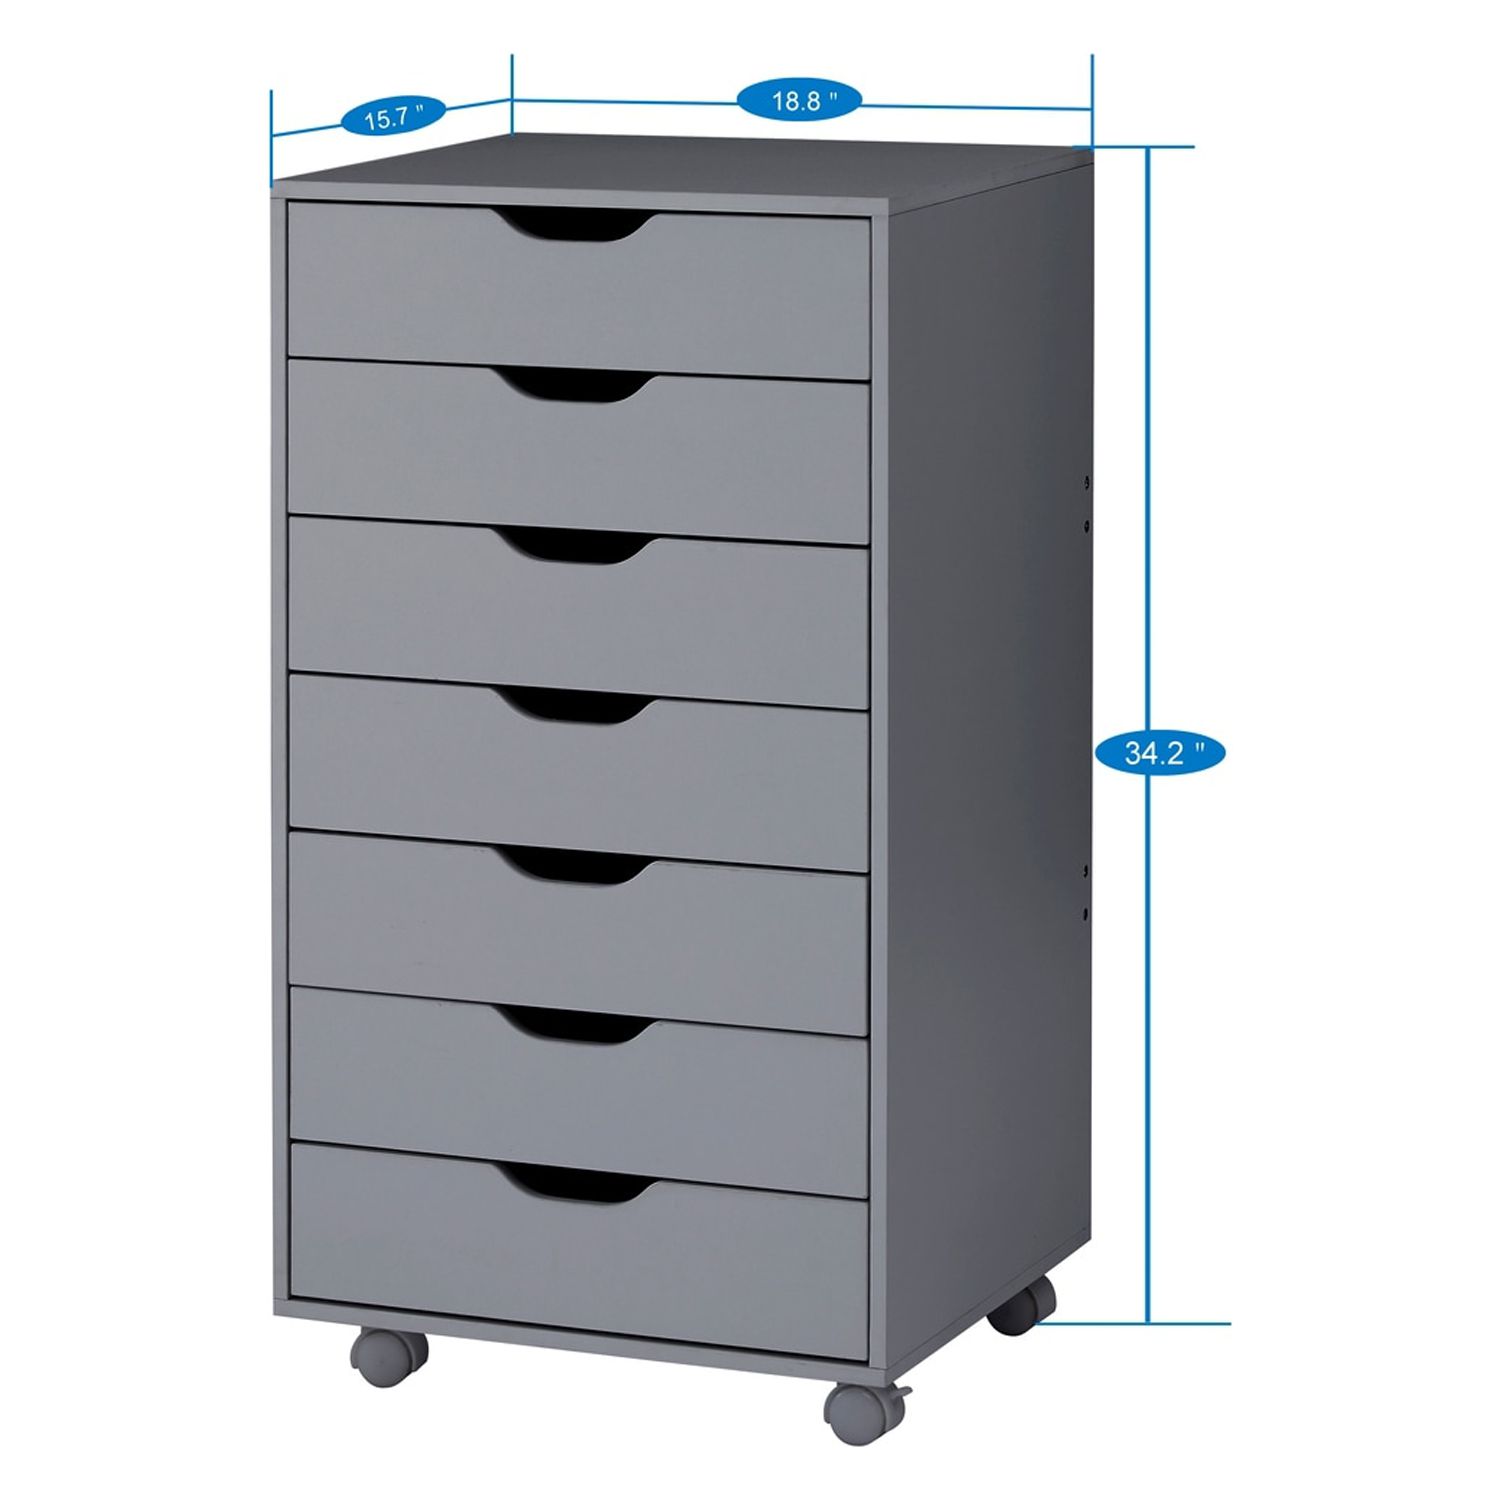 Office File Cabinets Wooden File Cabinets for Home Office Lateral File Cabinet File Cabinet Mobile Storage Drawer Cabinet - Grey Grey - image 4 of 5